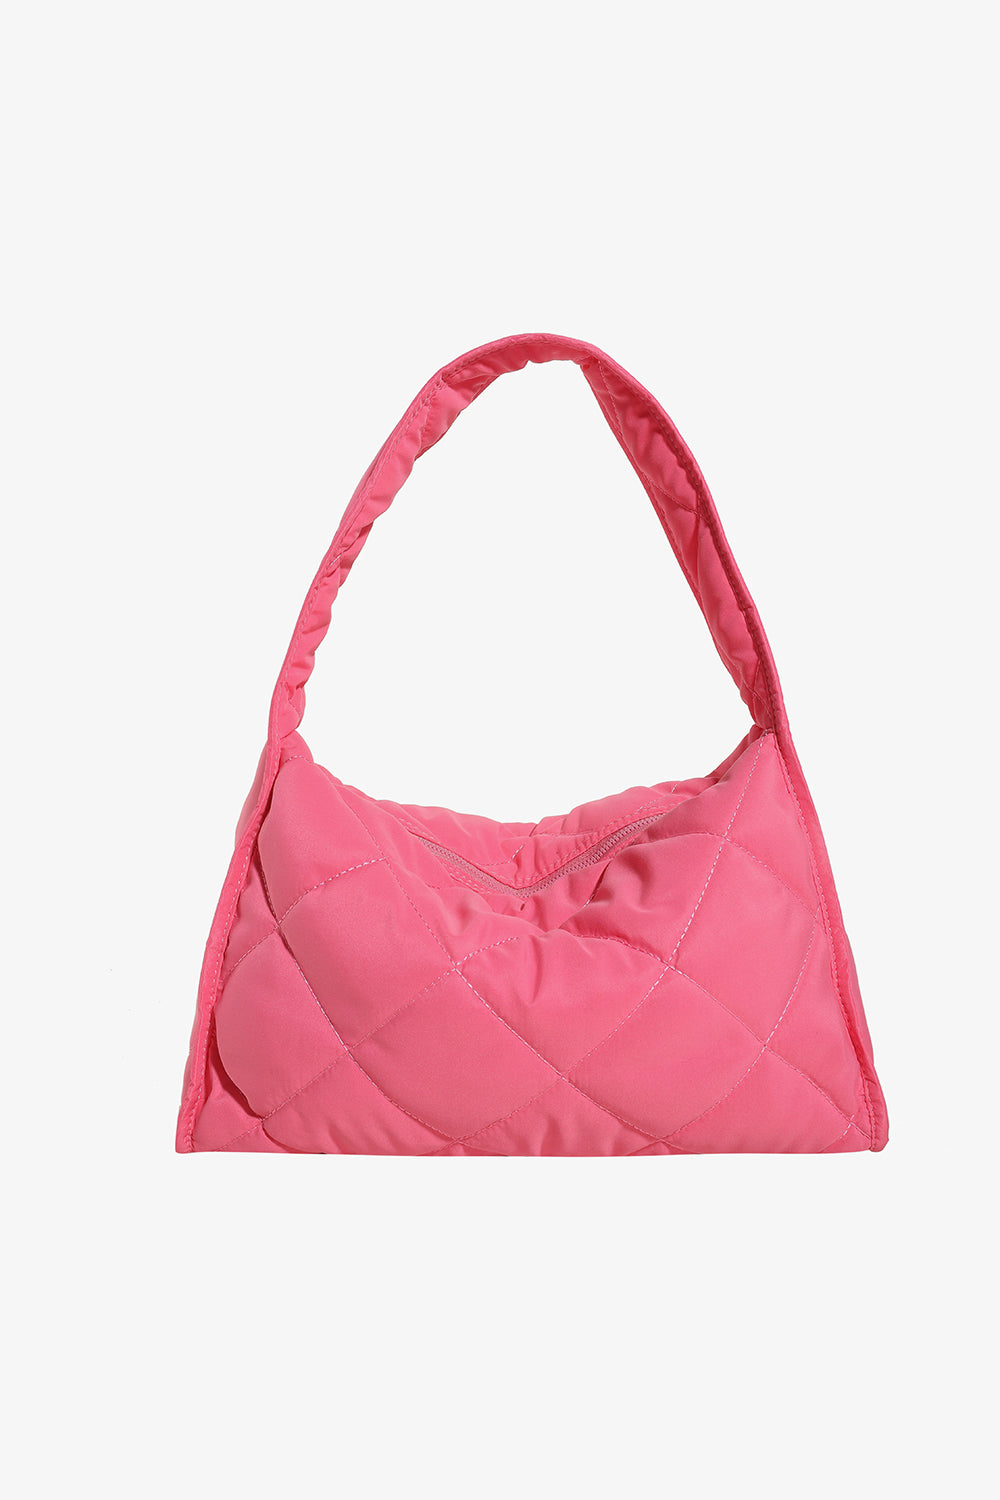 Nylon Shoulder Bag - handbag - Wild Willows Boutique - Massapequa, NY, affordable and fashionable clothing for women of all ages. Bottoms, tops, dresses, intimates, outerwear, sweater, shoes, accessories, jewelry, active wear, and more // Wild Willow Boutique.